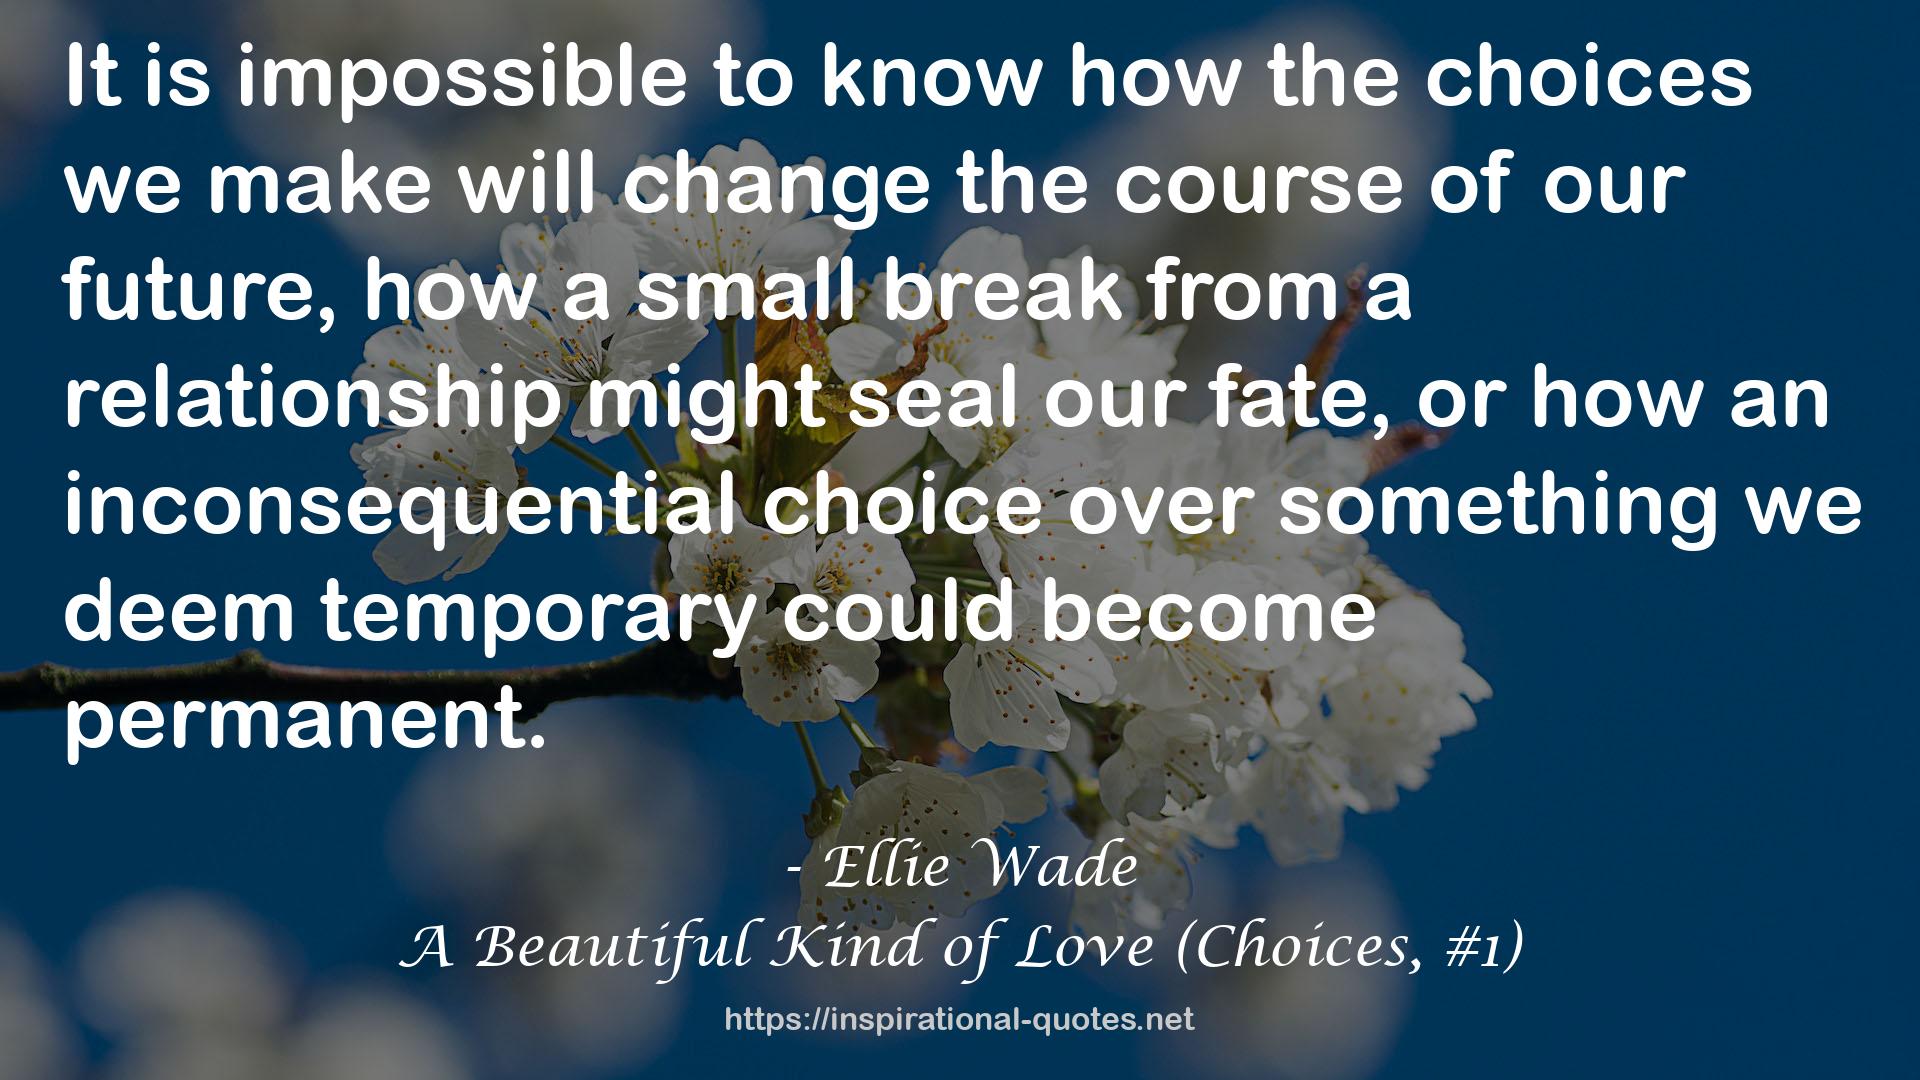 A Beautiful Kind of Love (Choices, #1) QUOTES